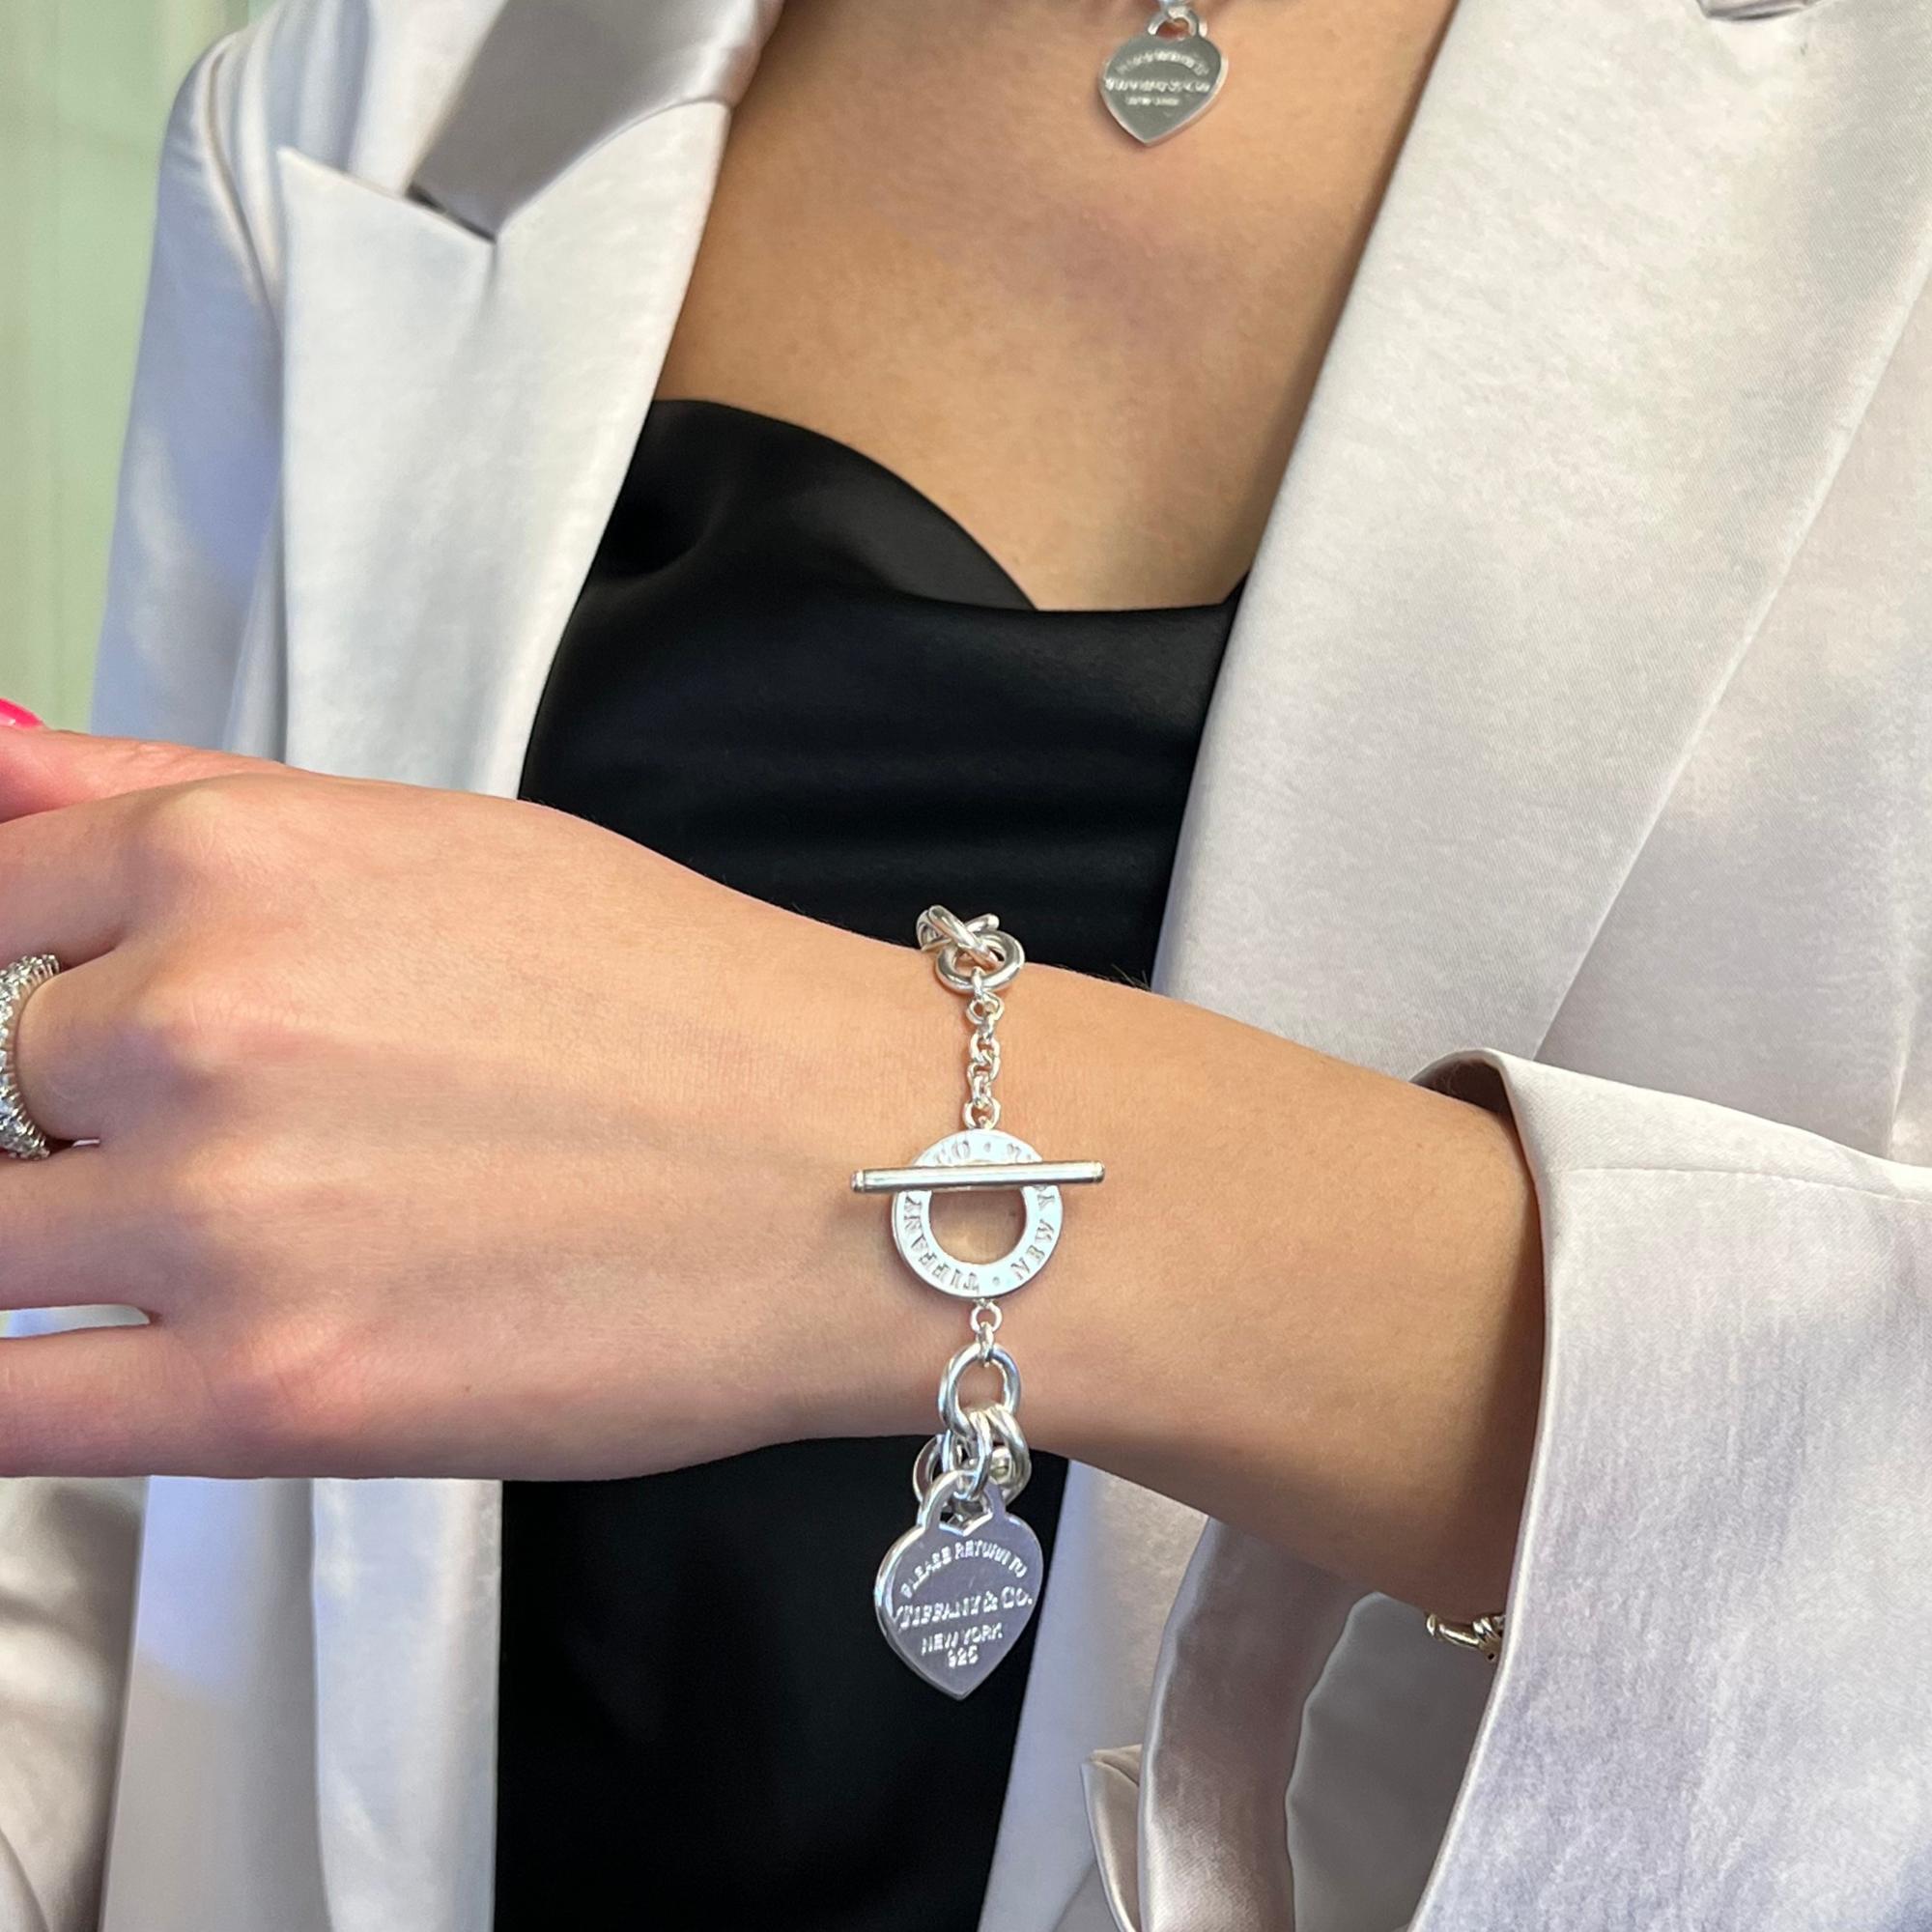 With a truly classic and elegant design, this bracelet embodies the collection's celebrated aesthetic. Designed in sterling silver 925. This corner hanging heart tag charm comes with engraving on the front and stamped on the back. Comes with a